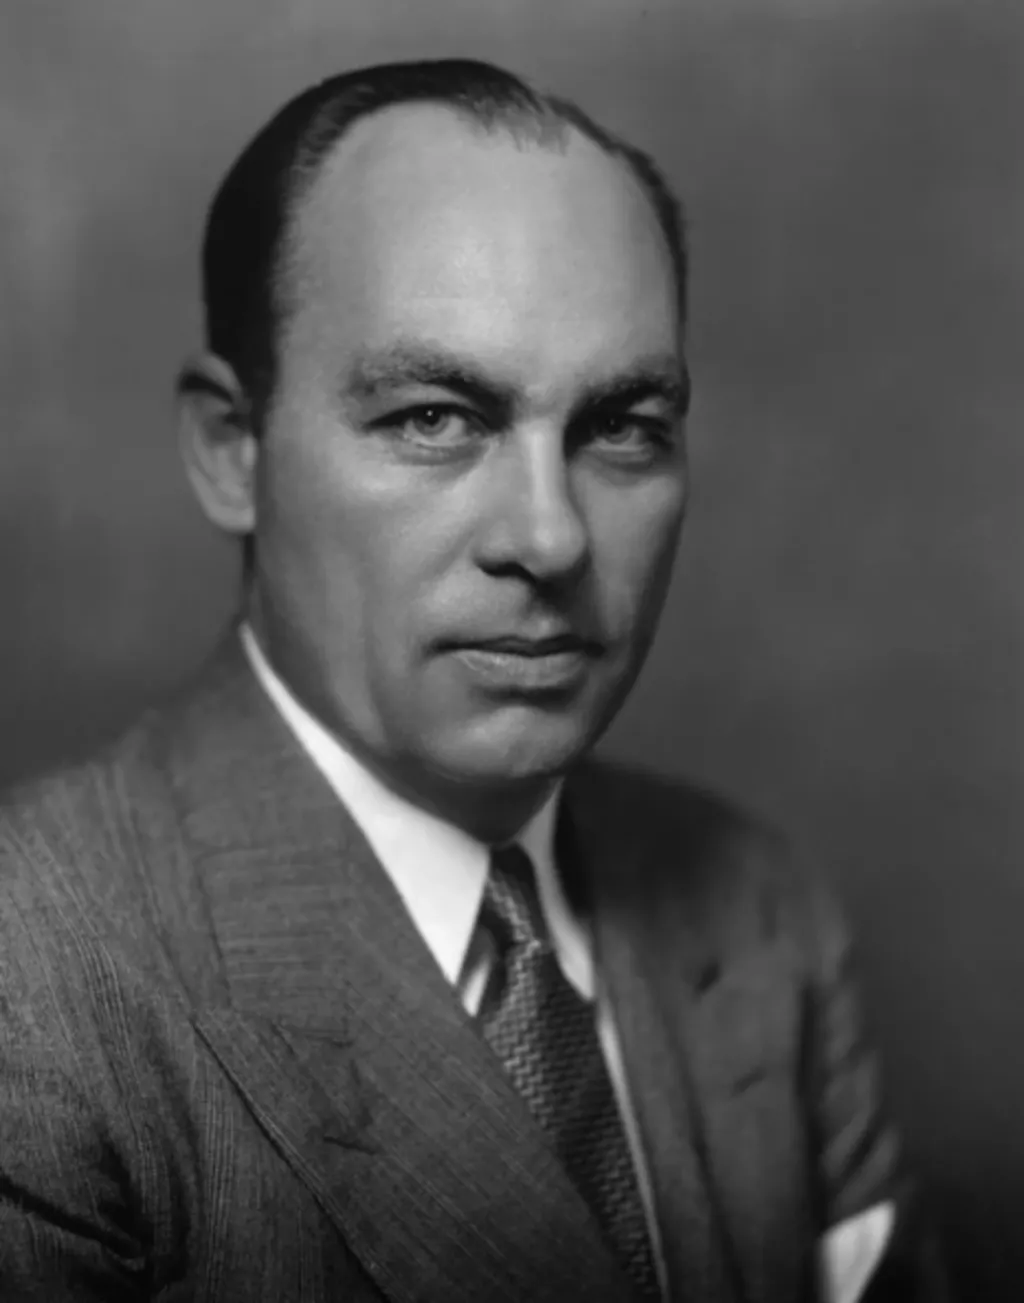 A portrait photo of George Gallup